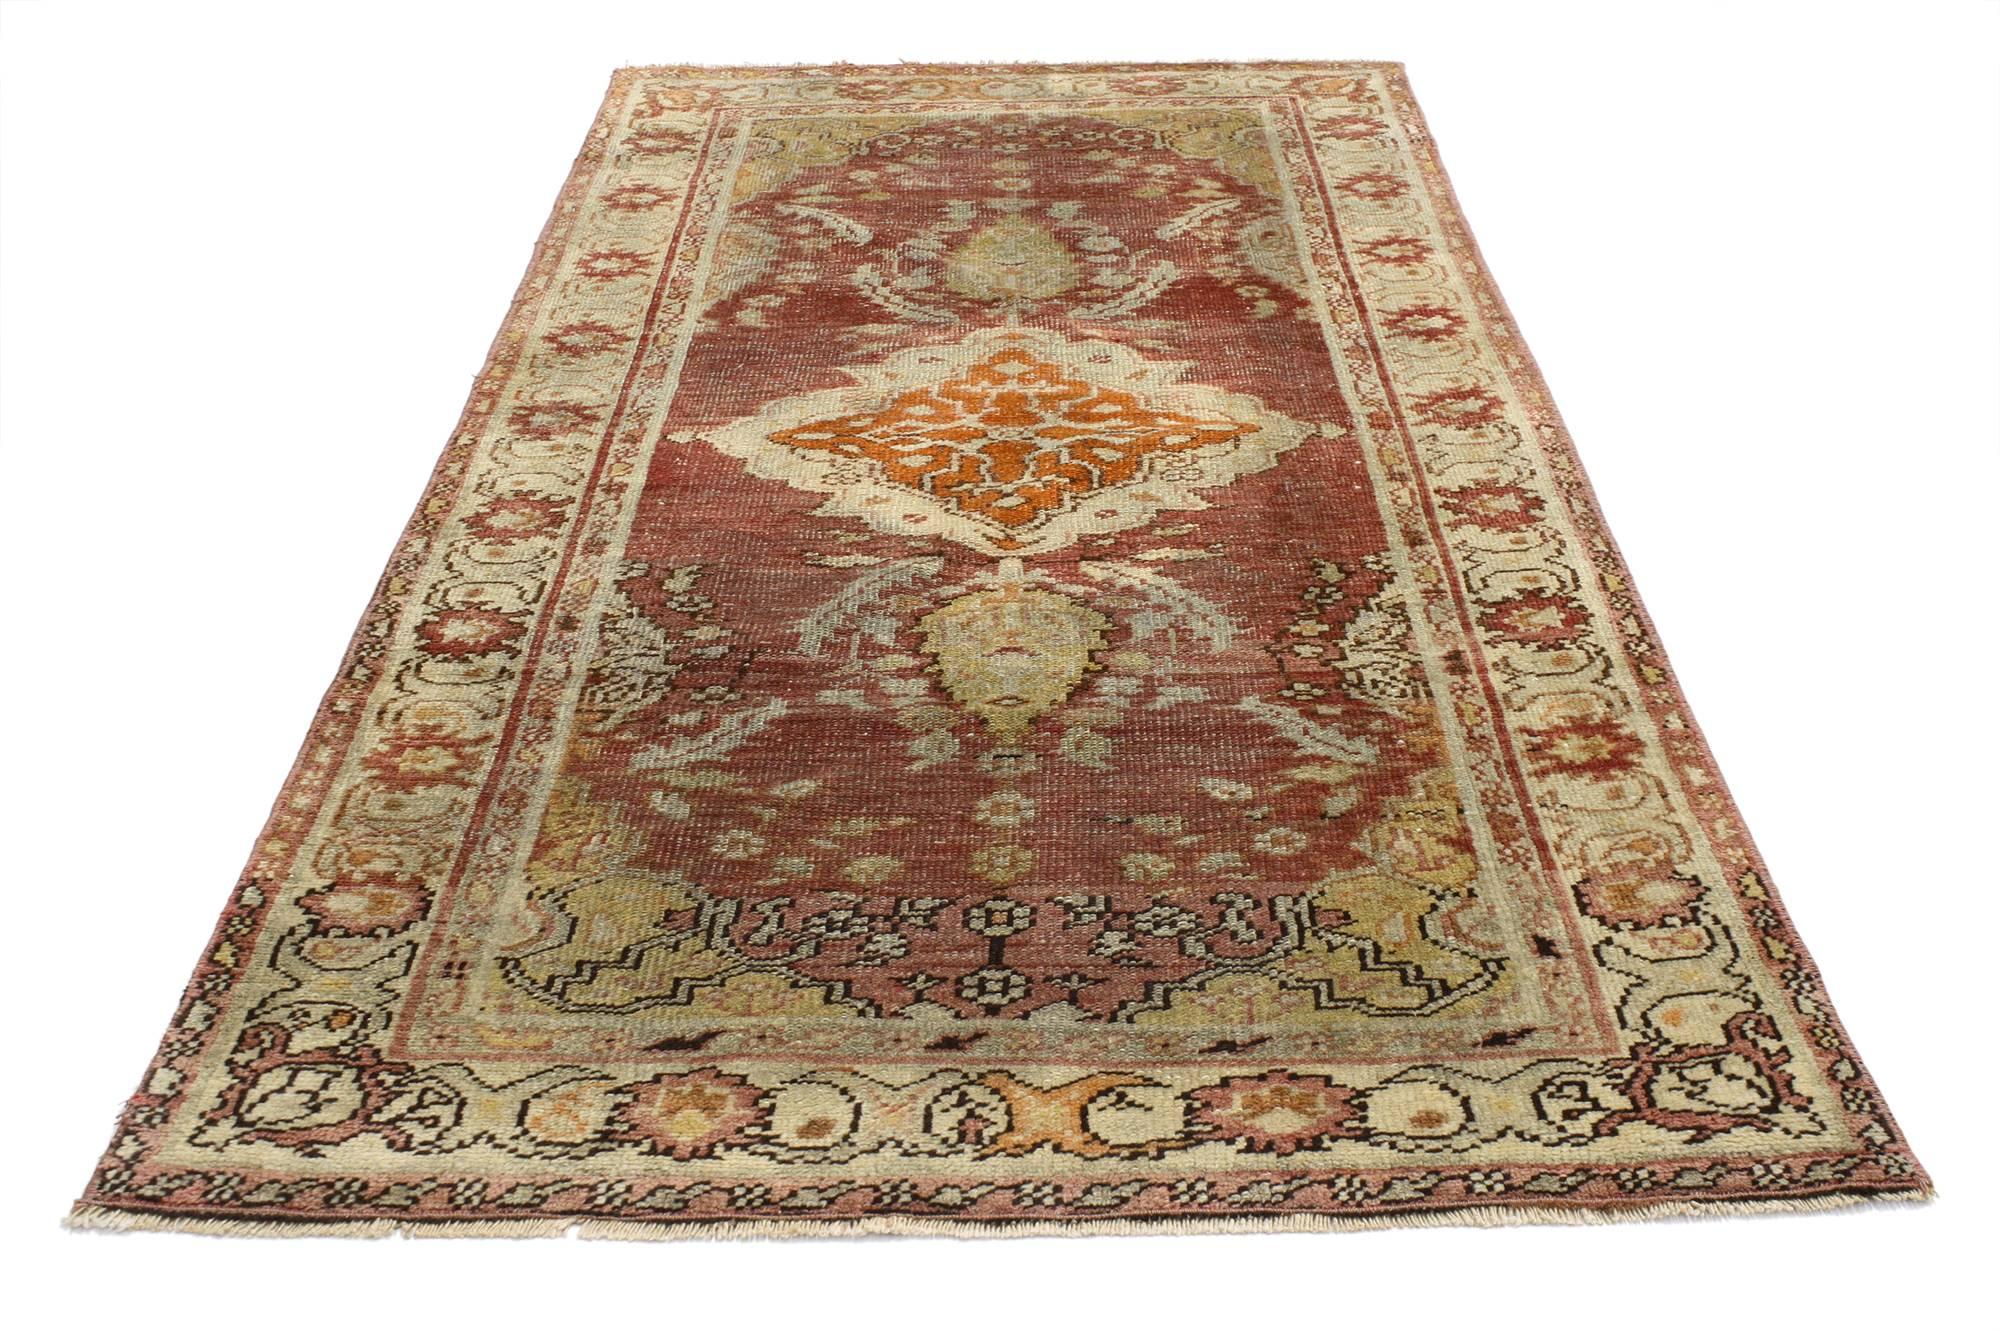 52084, distressed vintage Turkish Oushak Accent rug, entry or foyer rug. This vintage Turkish Oushak rug features a modern traditional style. Immersed in Anatolian history and refined colors, this vintage Oushak rug combines simplicity with